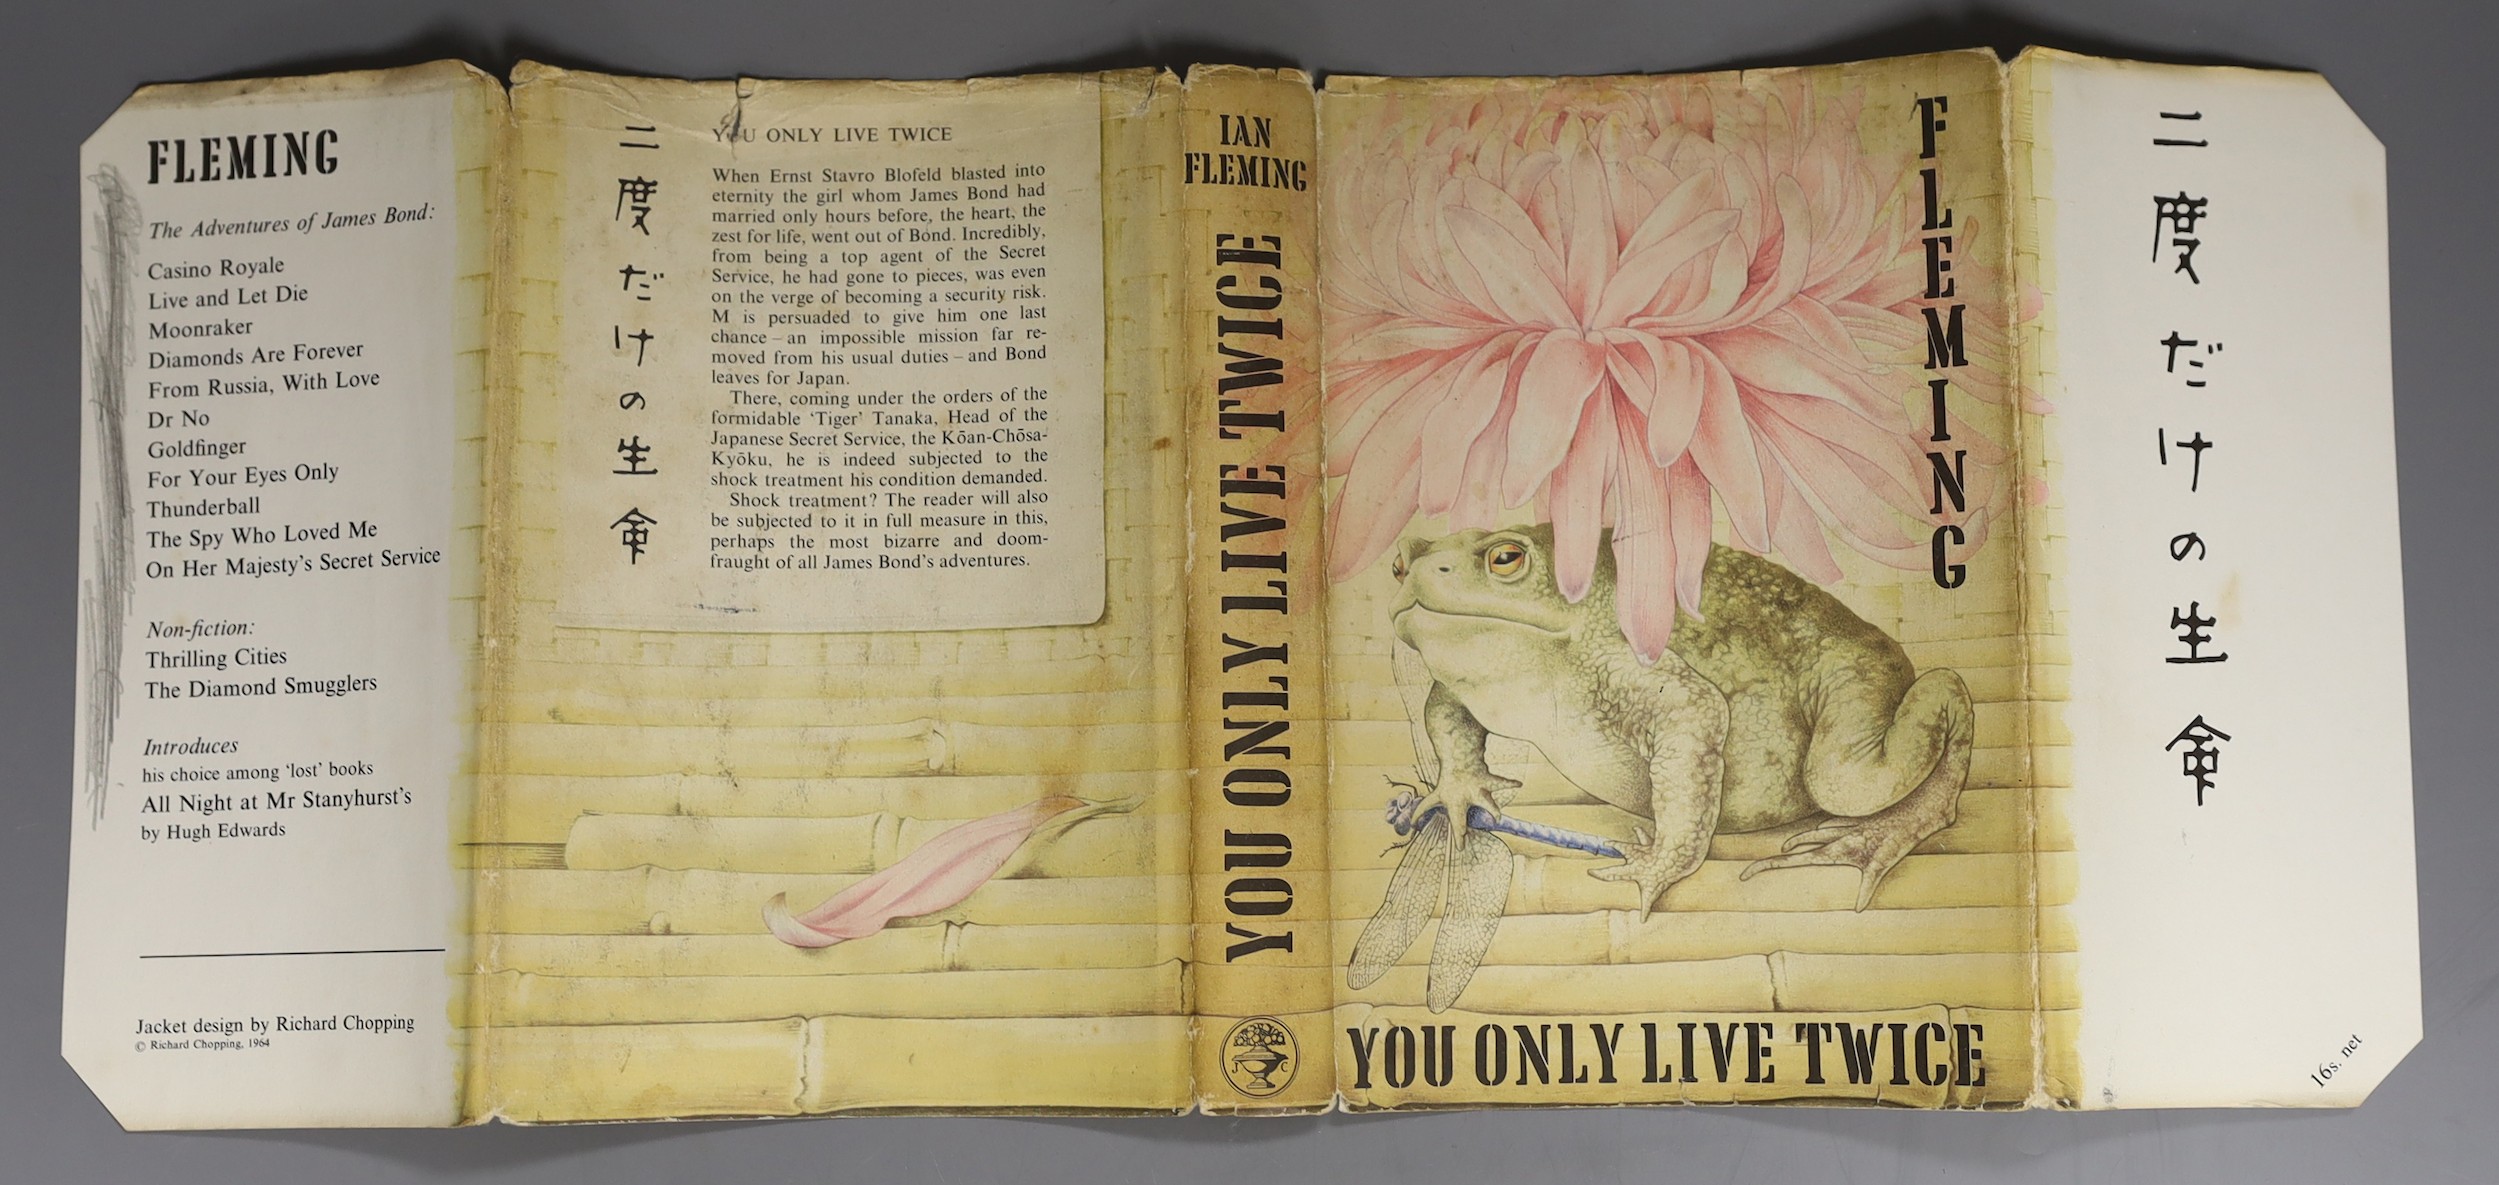 Fleming, Ian - You Only Live Twice, 1st edition, 8vo, cloth in unclipped d/j, Jonathan Cape, London, 1964